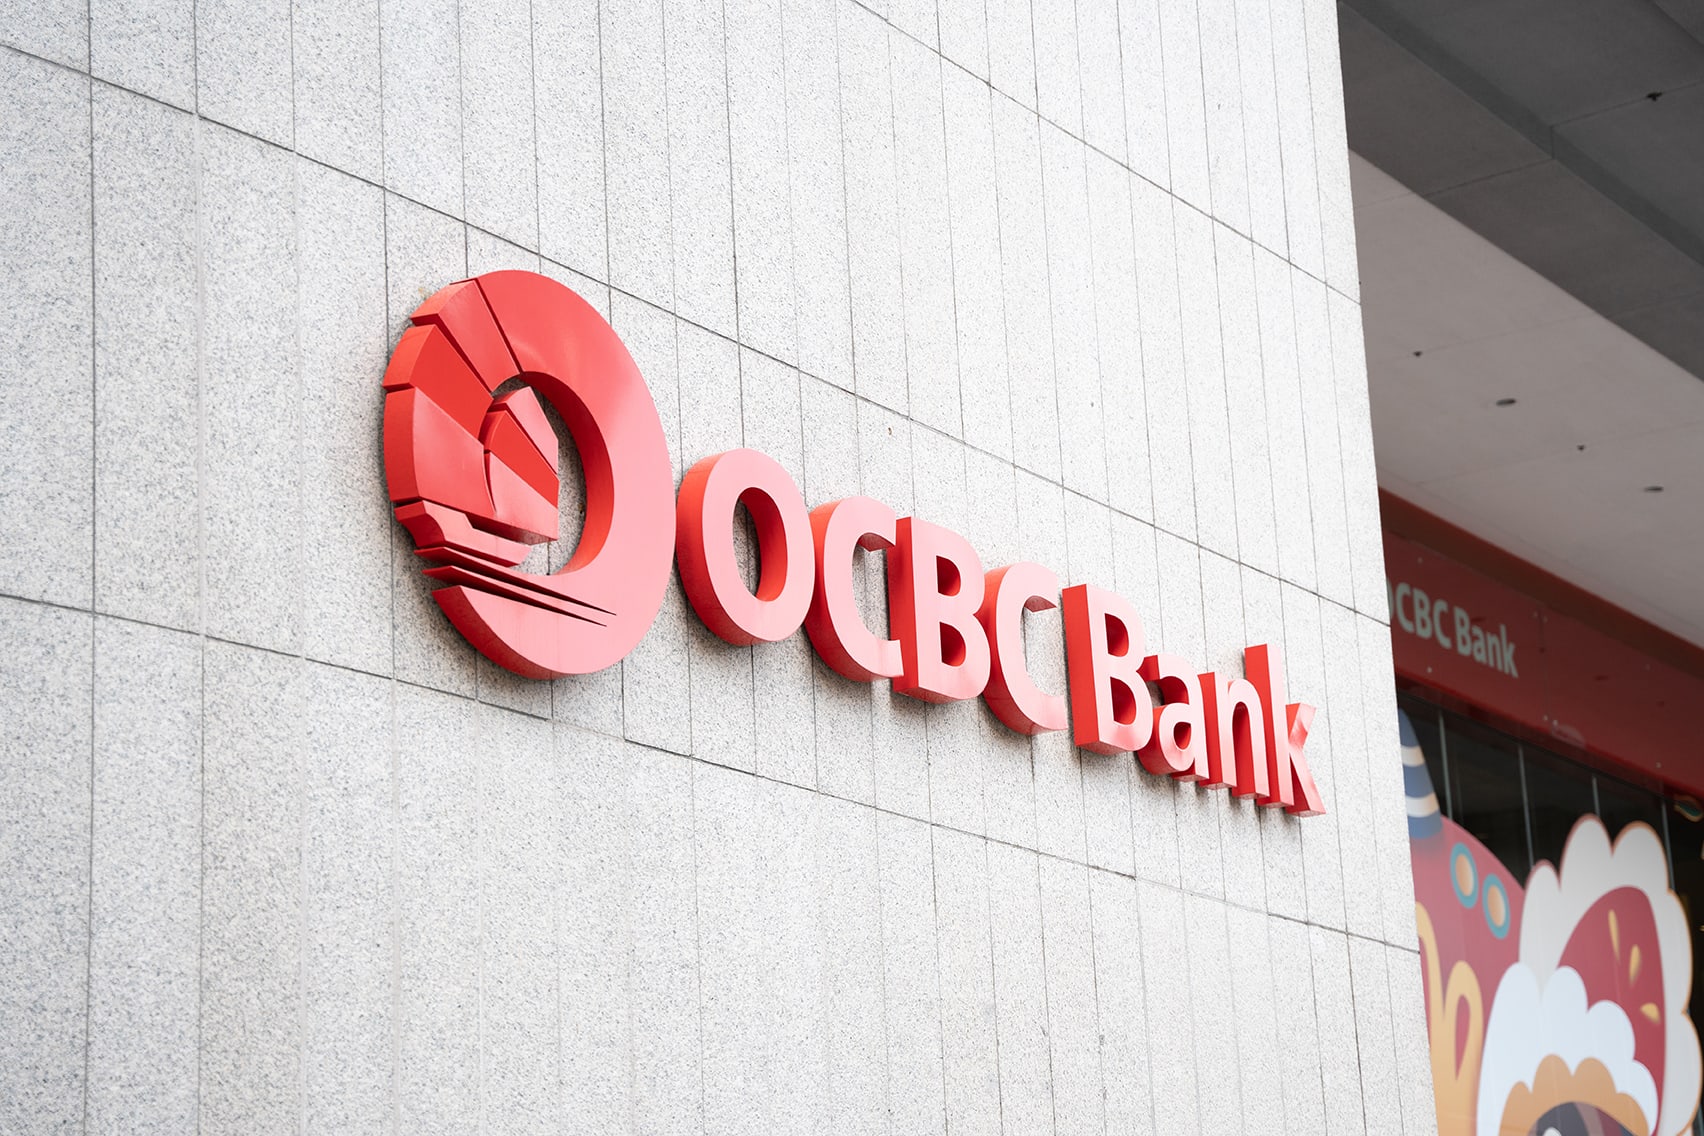 OCBC to fully reimburse all victims for money lost to SMS phishing scam; arrangements to be made by next week